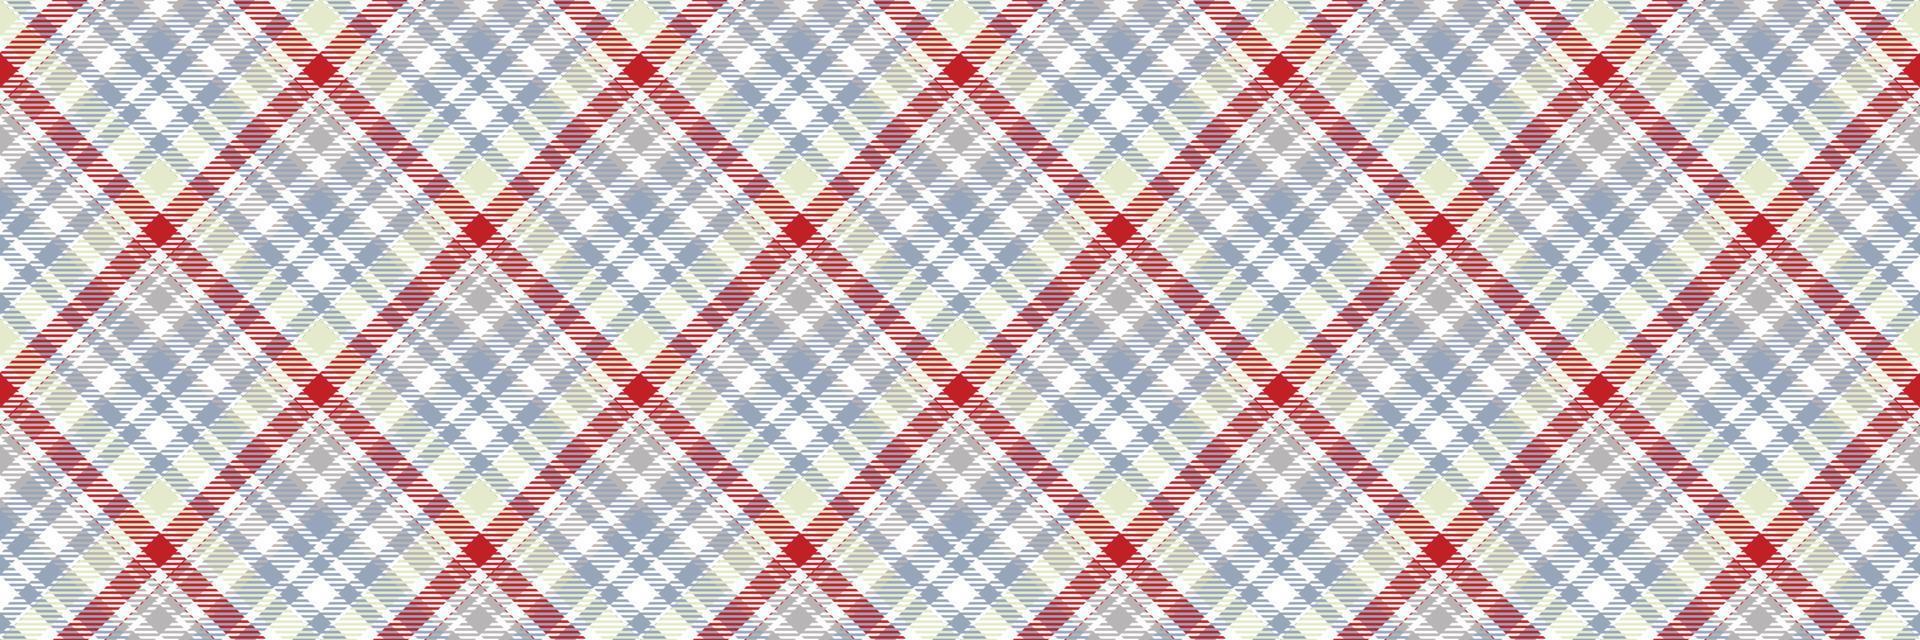 Plaids seamless pattern is a patterned cloth consisting of criss crossed, horizontal and vertical bands in multiple colours.plaid Seamless for  scarf,pyjamas,blanket,duvet,kilt large shawl. vector